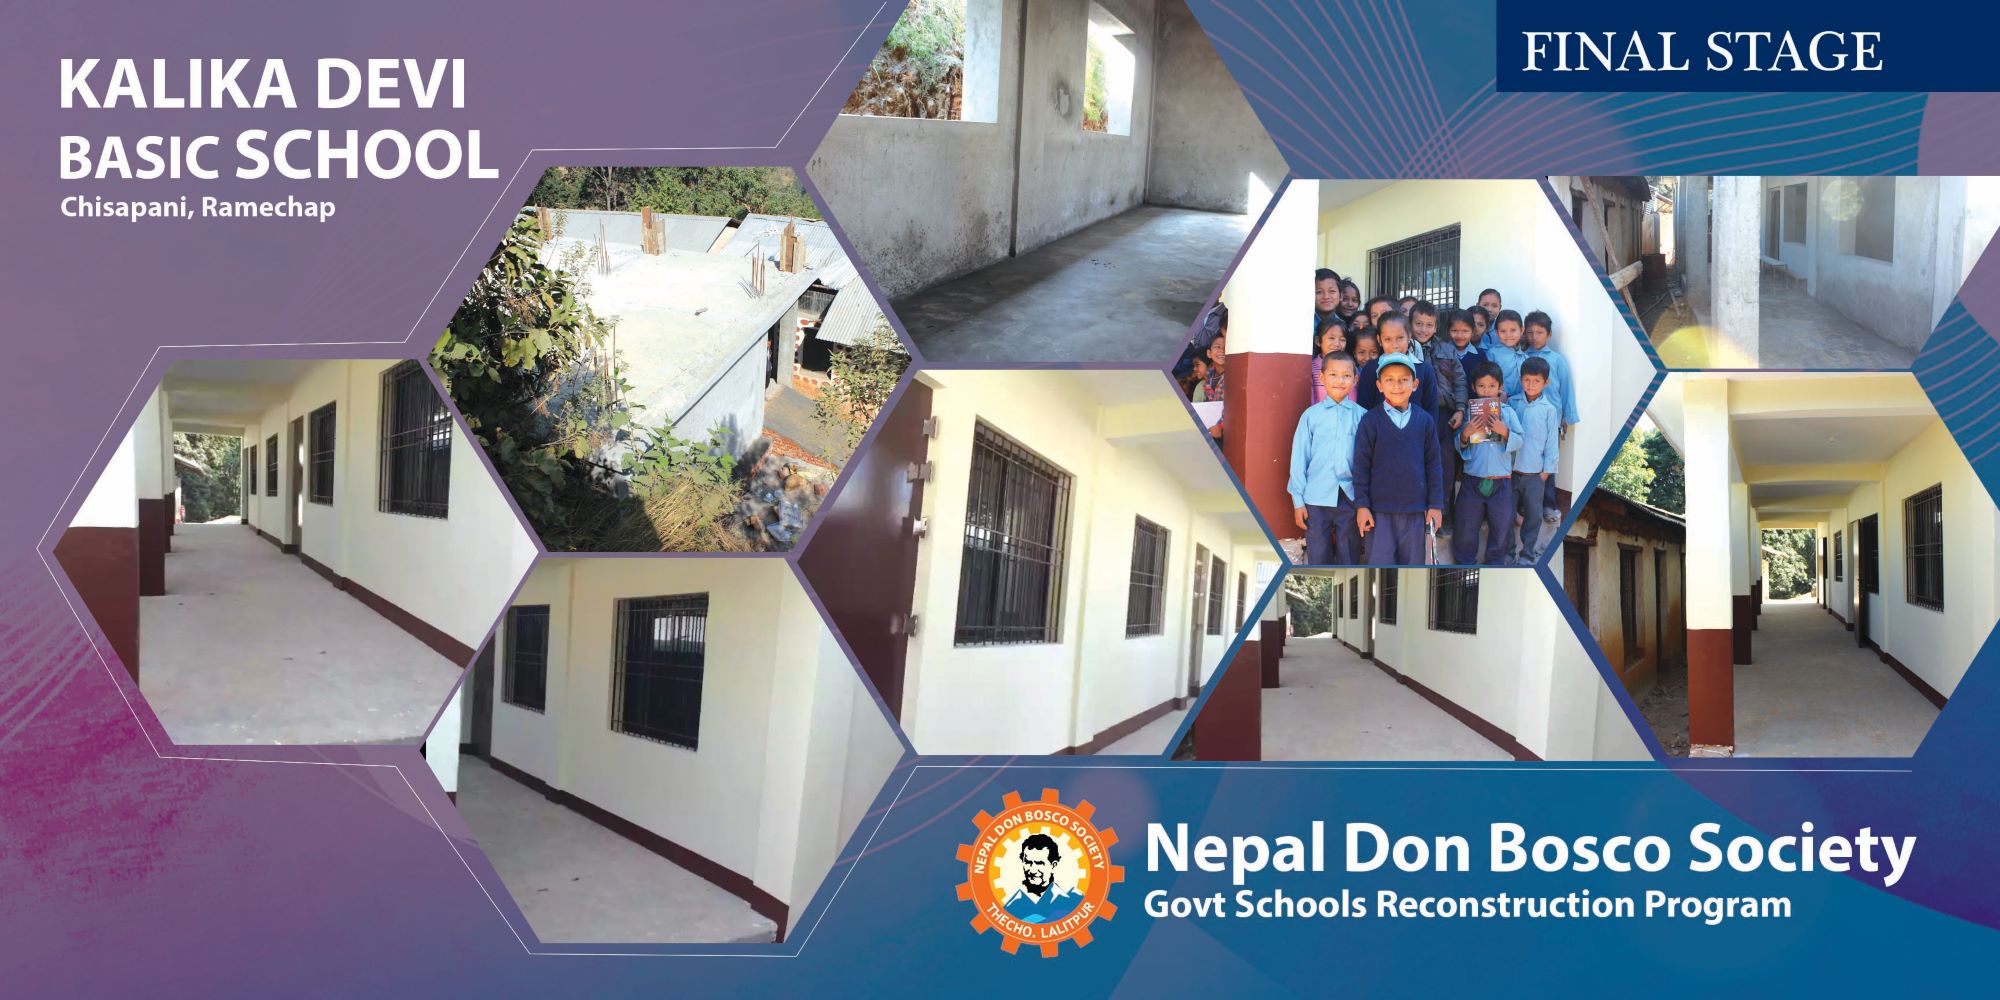 <p></p><p><b>Nepal Don Bosco Society(NDBS),
Thecho, Lalitpur</b></p>

<p> Nepal Don Bosco Society came
to existence in 2053 B.S. (1996 AD)  with
the objective of providing various types of academic, technical and vocational
education to the economically and socially
backward youths and unemployed citizens and helpless people through opening of educational
institutions and by maintaining spiritual
solidarity among citizens of various classes dwelling in the country and to
prepare able, competent, dutiful and self-sustained citizens in future by
creating proper opportunity of employment by providing skill-oriented education
to them through the said educational institutions.</p>

<p>Focussed on this mission, despite
the short span of time, institutions associated with this Society have rendered
valuable service to the country by educating nearly 3500 students of the
academic section and training 2800 in the vocational trades through its five
educational and two technical institutions situated in the Eastern and Central
regions of the country. </p>

<p>A great opportunity for the NDBS
came with the Earthquake of 2015 which took away over ten thousand lives and
property worth millions. The society sprung into action to respond to this
tragedy.  The Nepal Don Bosco Society (NDBS) extended
its full support to alleviate the misery of the helpless, traumatized,
impoverished  and the struggling
situation of the of the people on post-earthquake days. In addition to the
relief materials of various kind distributed to the 35000 families of 14
severely affected districts of Nepal, the society has built up 22 temporary
learning centres (TLCs) and constructed 2 drinking water projects for the
people of two districts and re-constructed 10 government schools of five
districts. With support from various donors, the society provided also other
support systems like the classroom furniture, computers, solar system etc, and led
from the front to provide school uniform and stationery to the students of 40
schools of 7 districts.</p>

<p>The society with its technical
schools in the Eastern and the central zones is catering to the rehabilitation
dimension of the post earthquake recovery measures of the government.</p>

<p> The society hopes to extend
its full support to the country by shaping a strong and skilled youth
generation who will build an economically sound and stable Nepal.</p>

<p> </p><p></p>